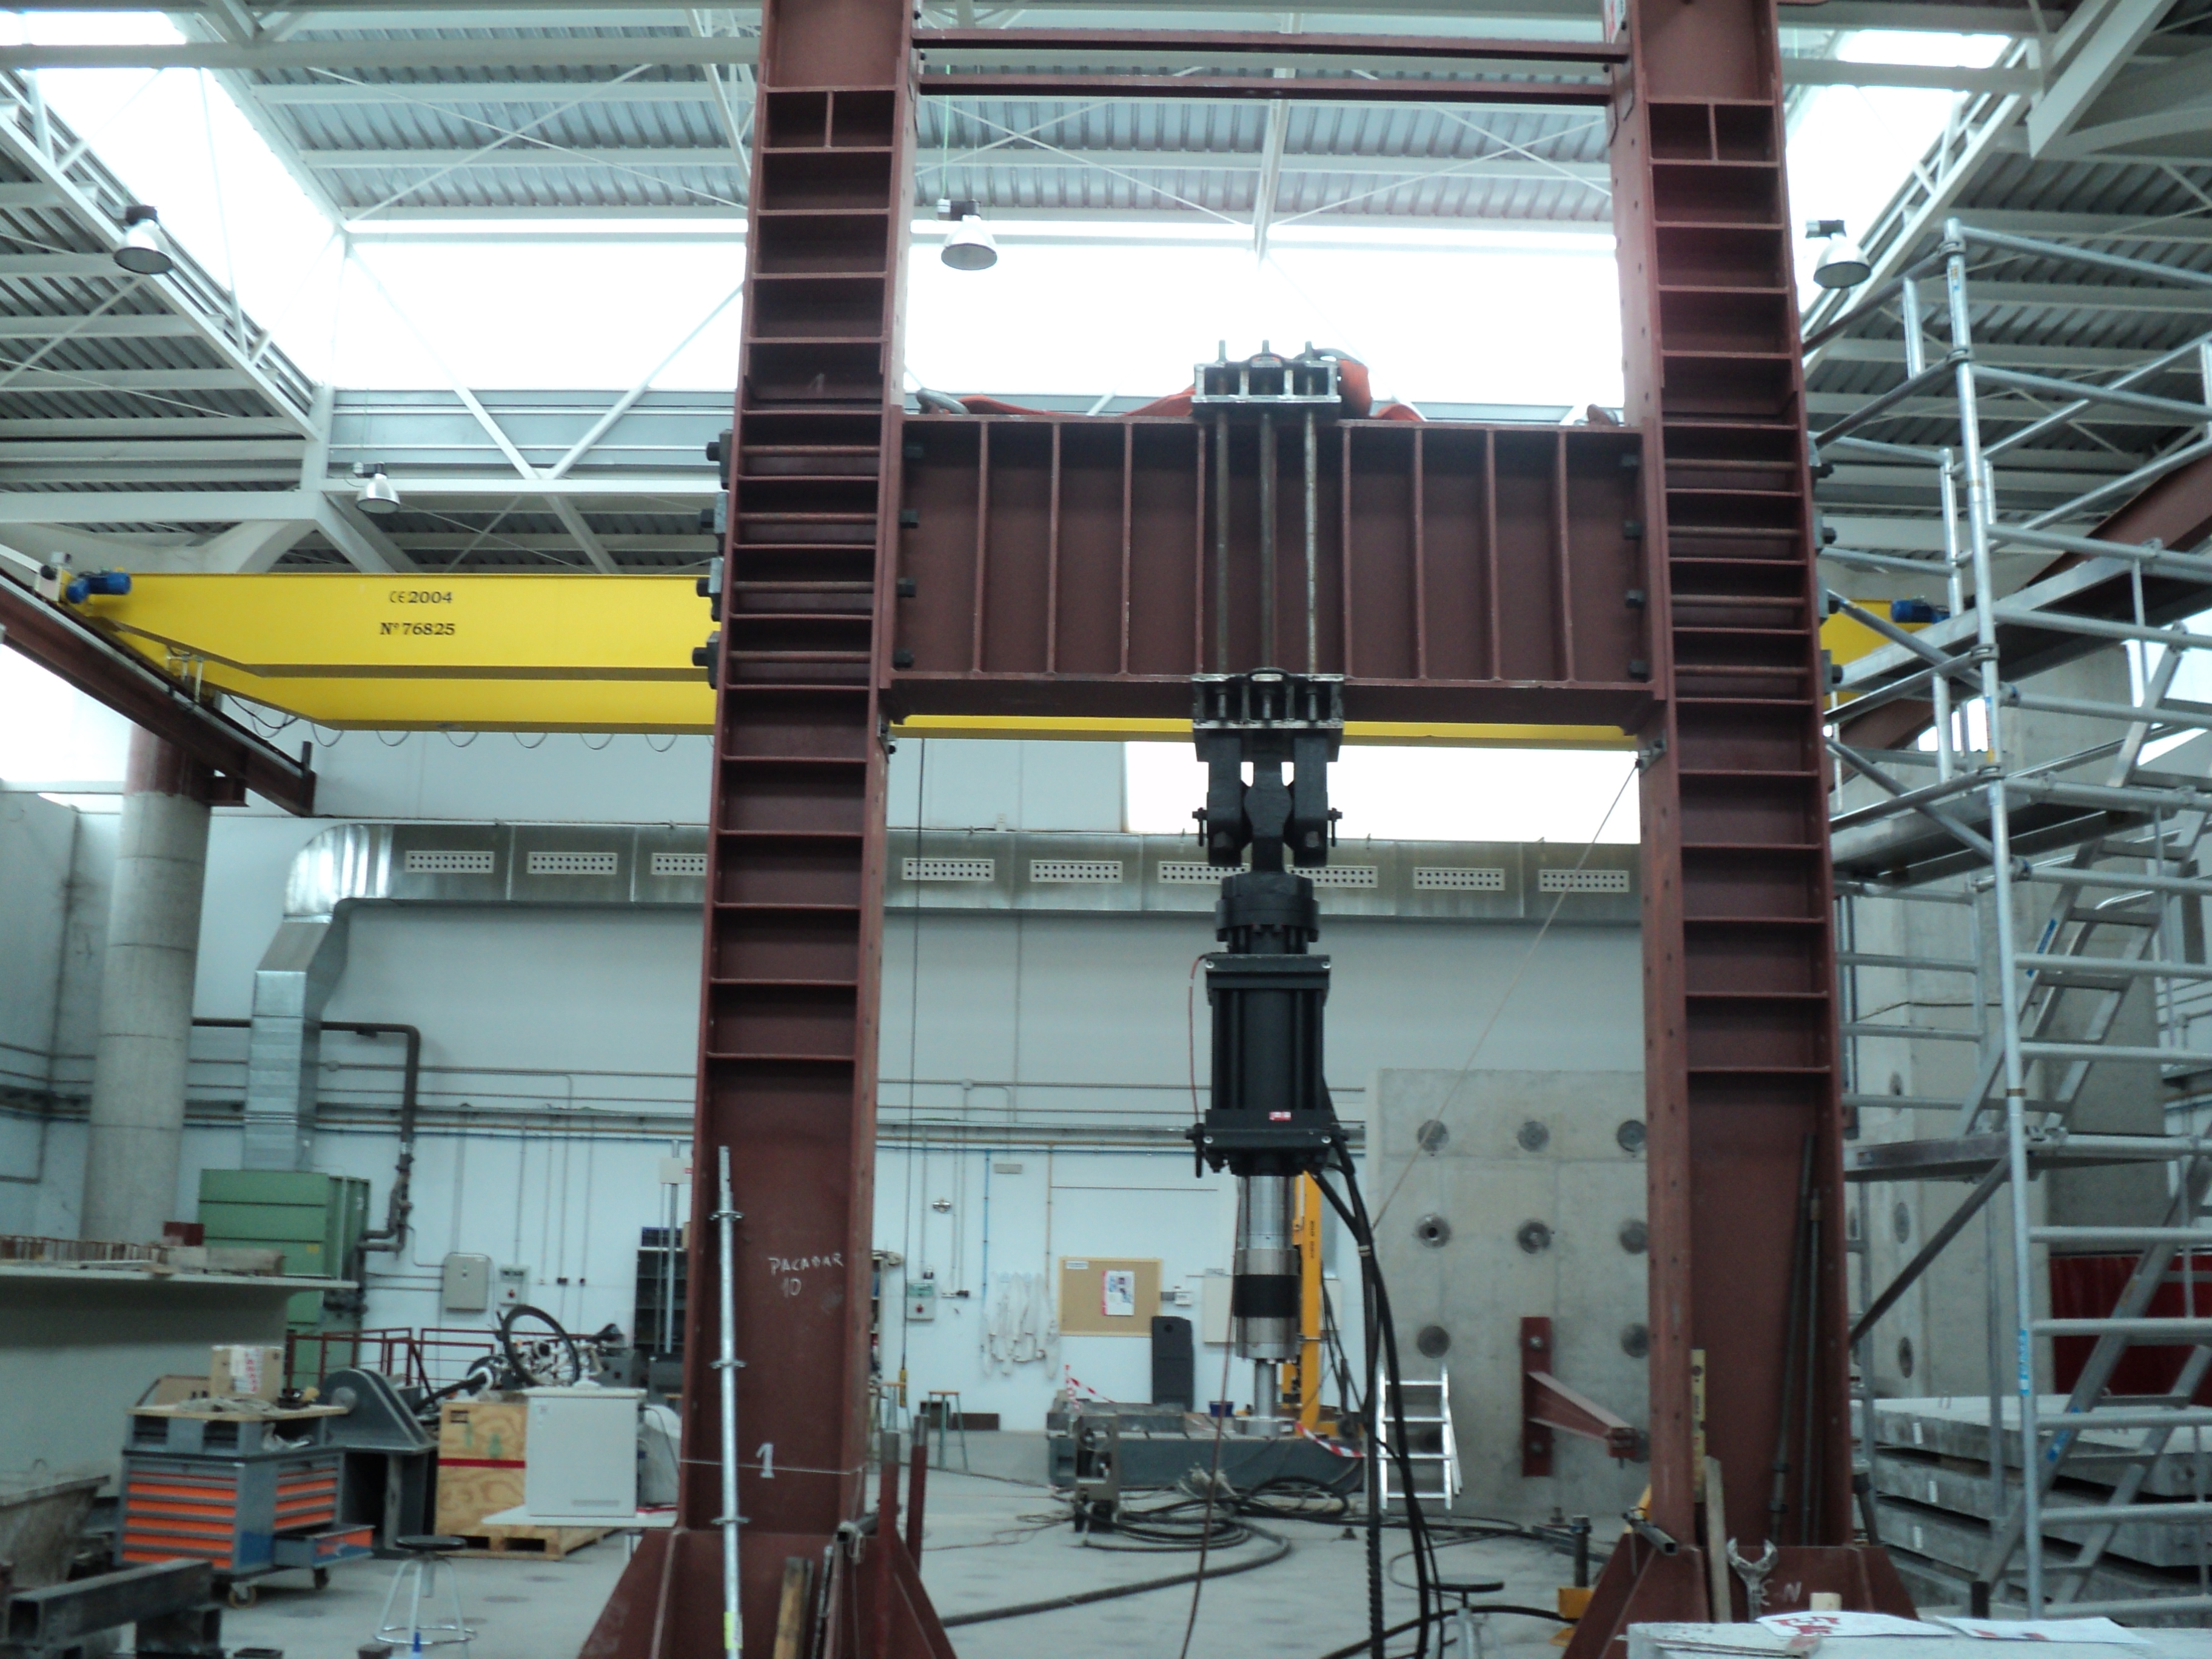 Large scale structural testing for civil engineering, energy industry and others, including static and dynamic testings